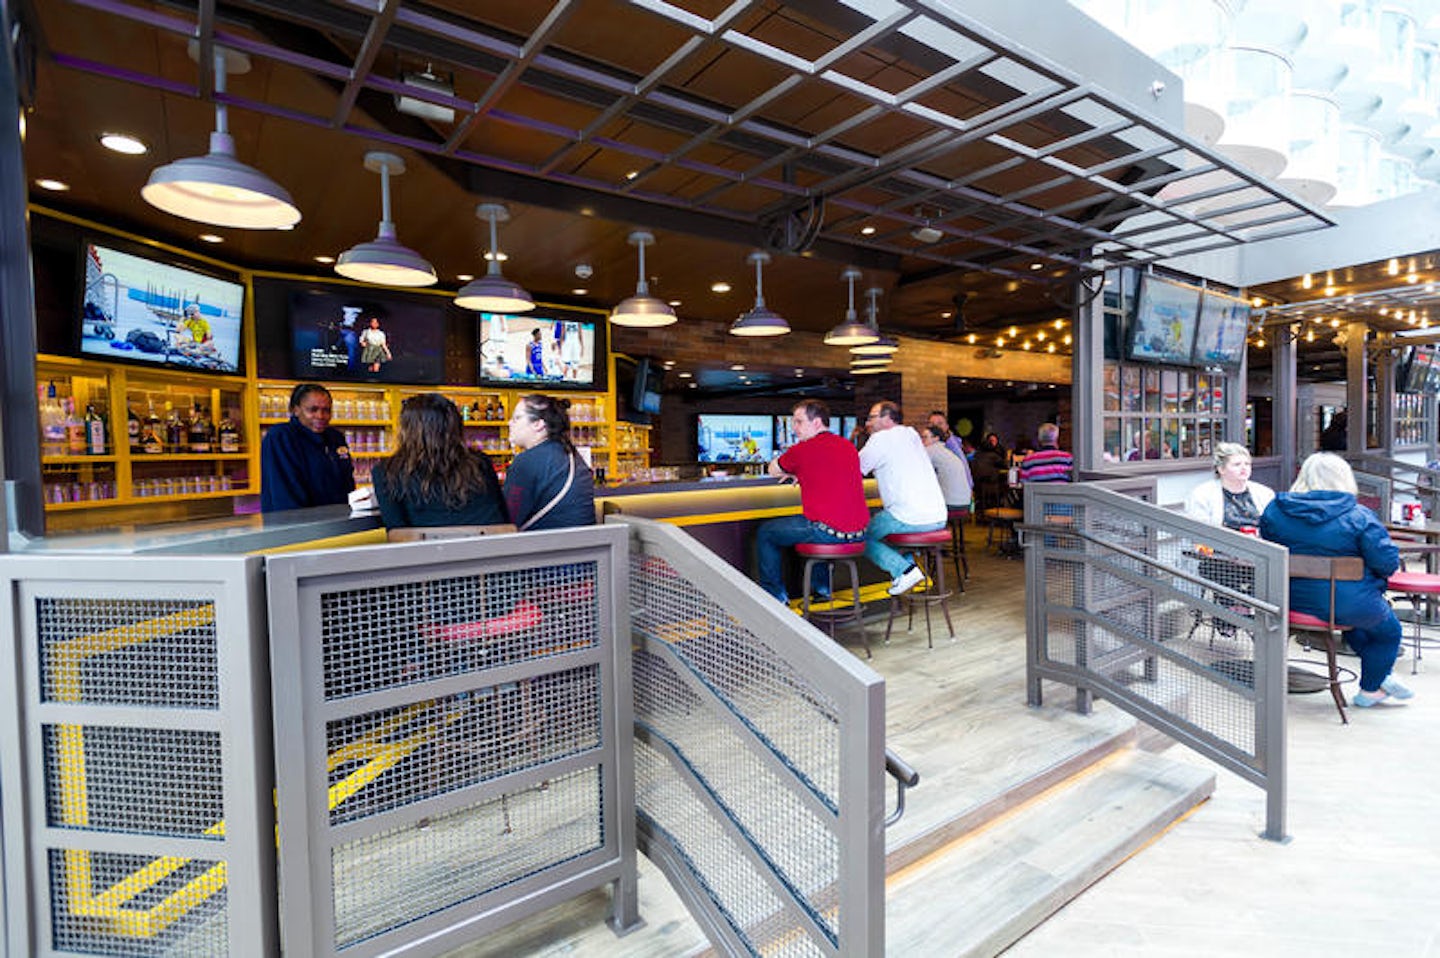 Playmakers Sports Bar & Arcade on Symphony of the Seas